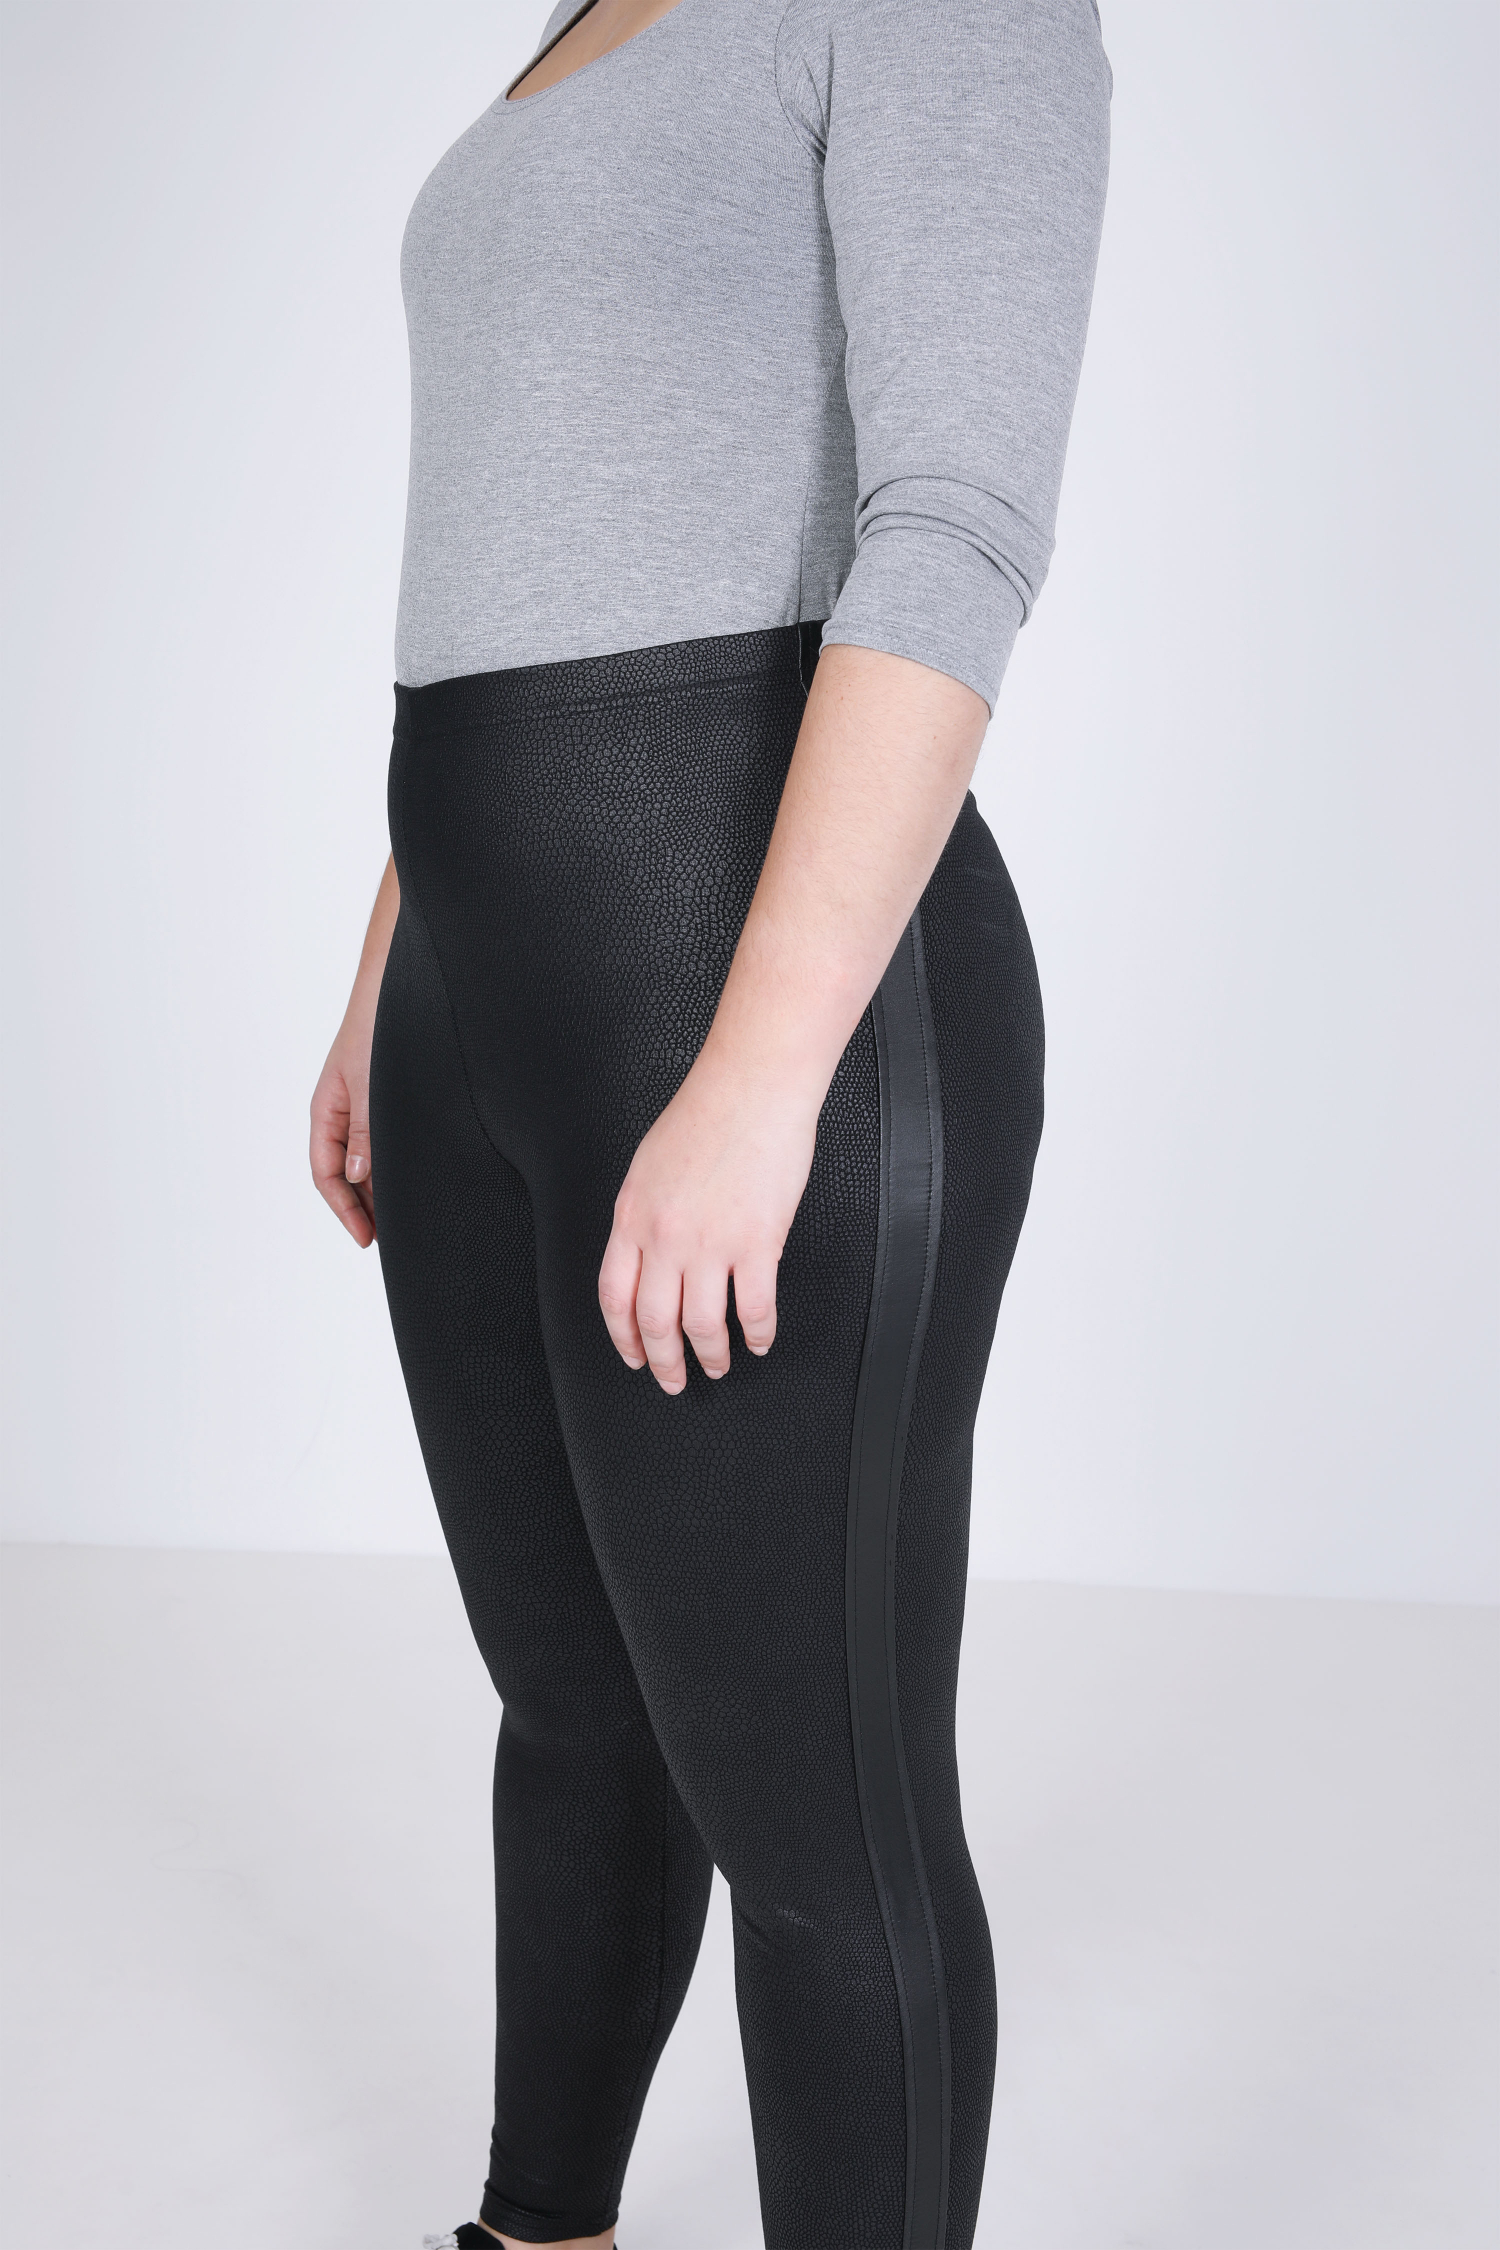 Vegan leather leggings with side band